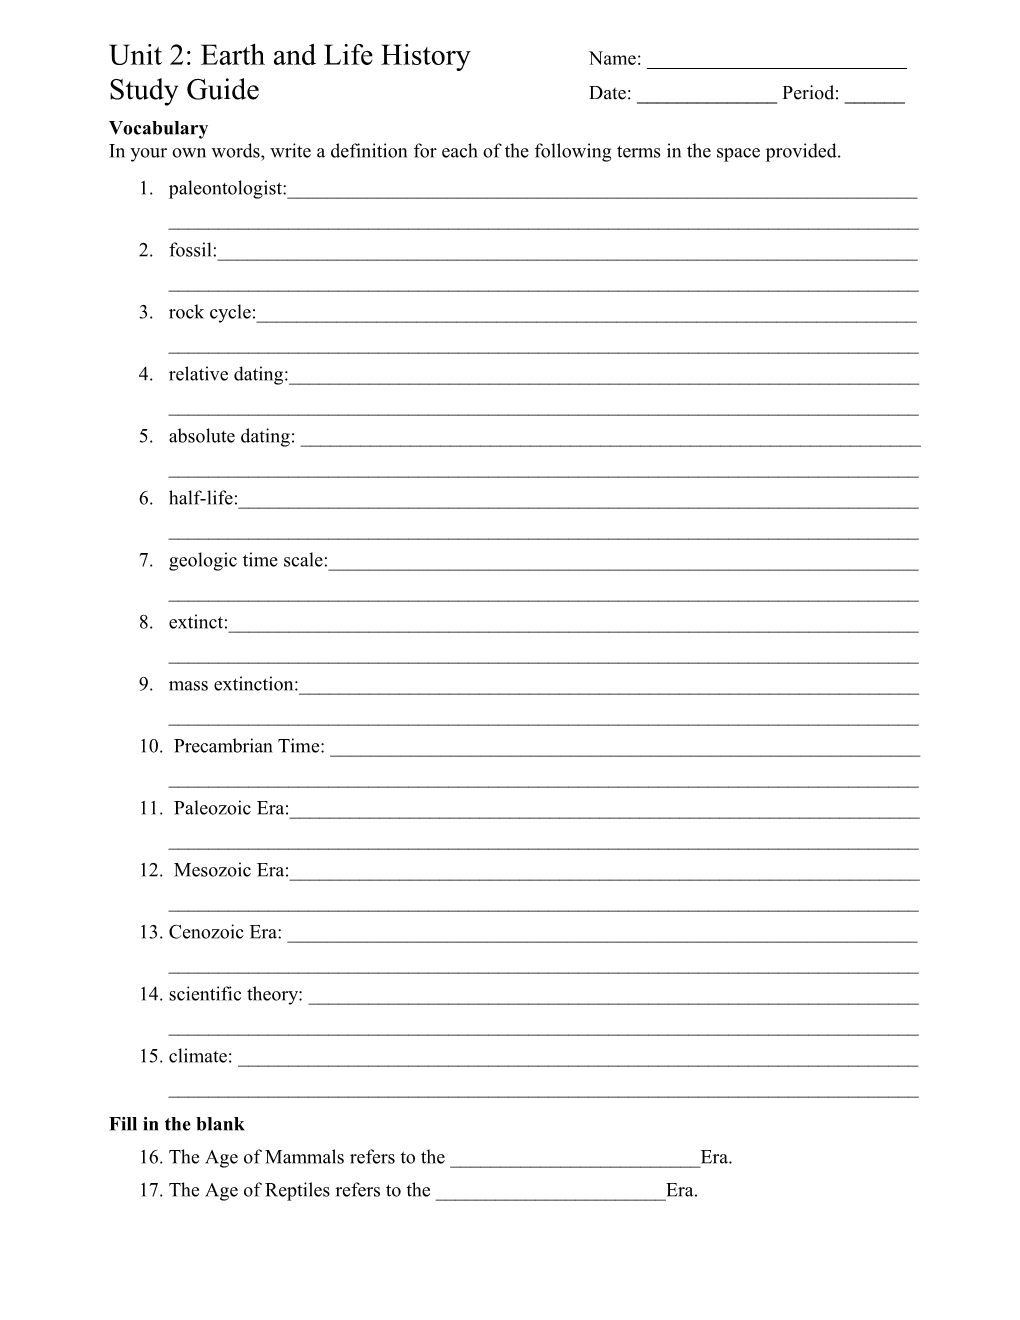 Unit 2: Earth and Life History Study Guide